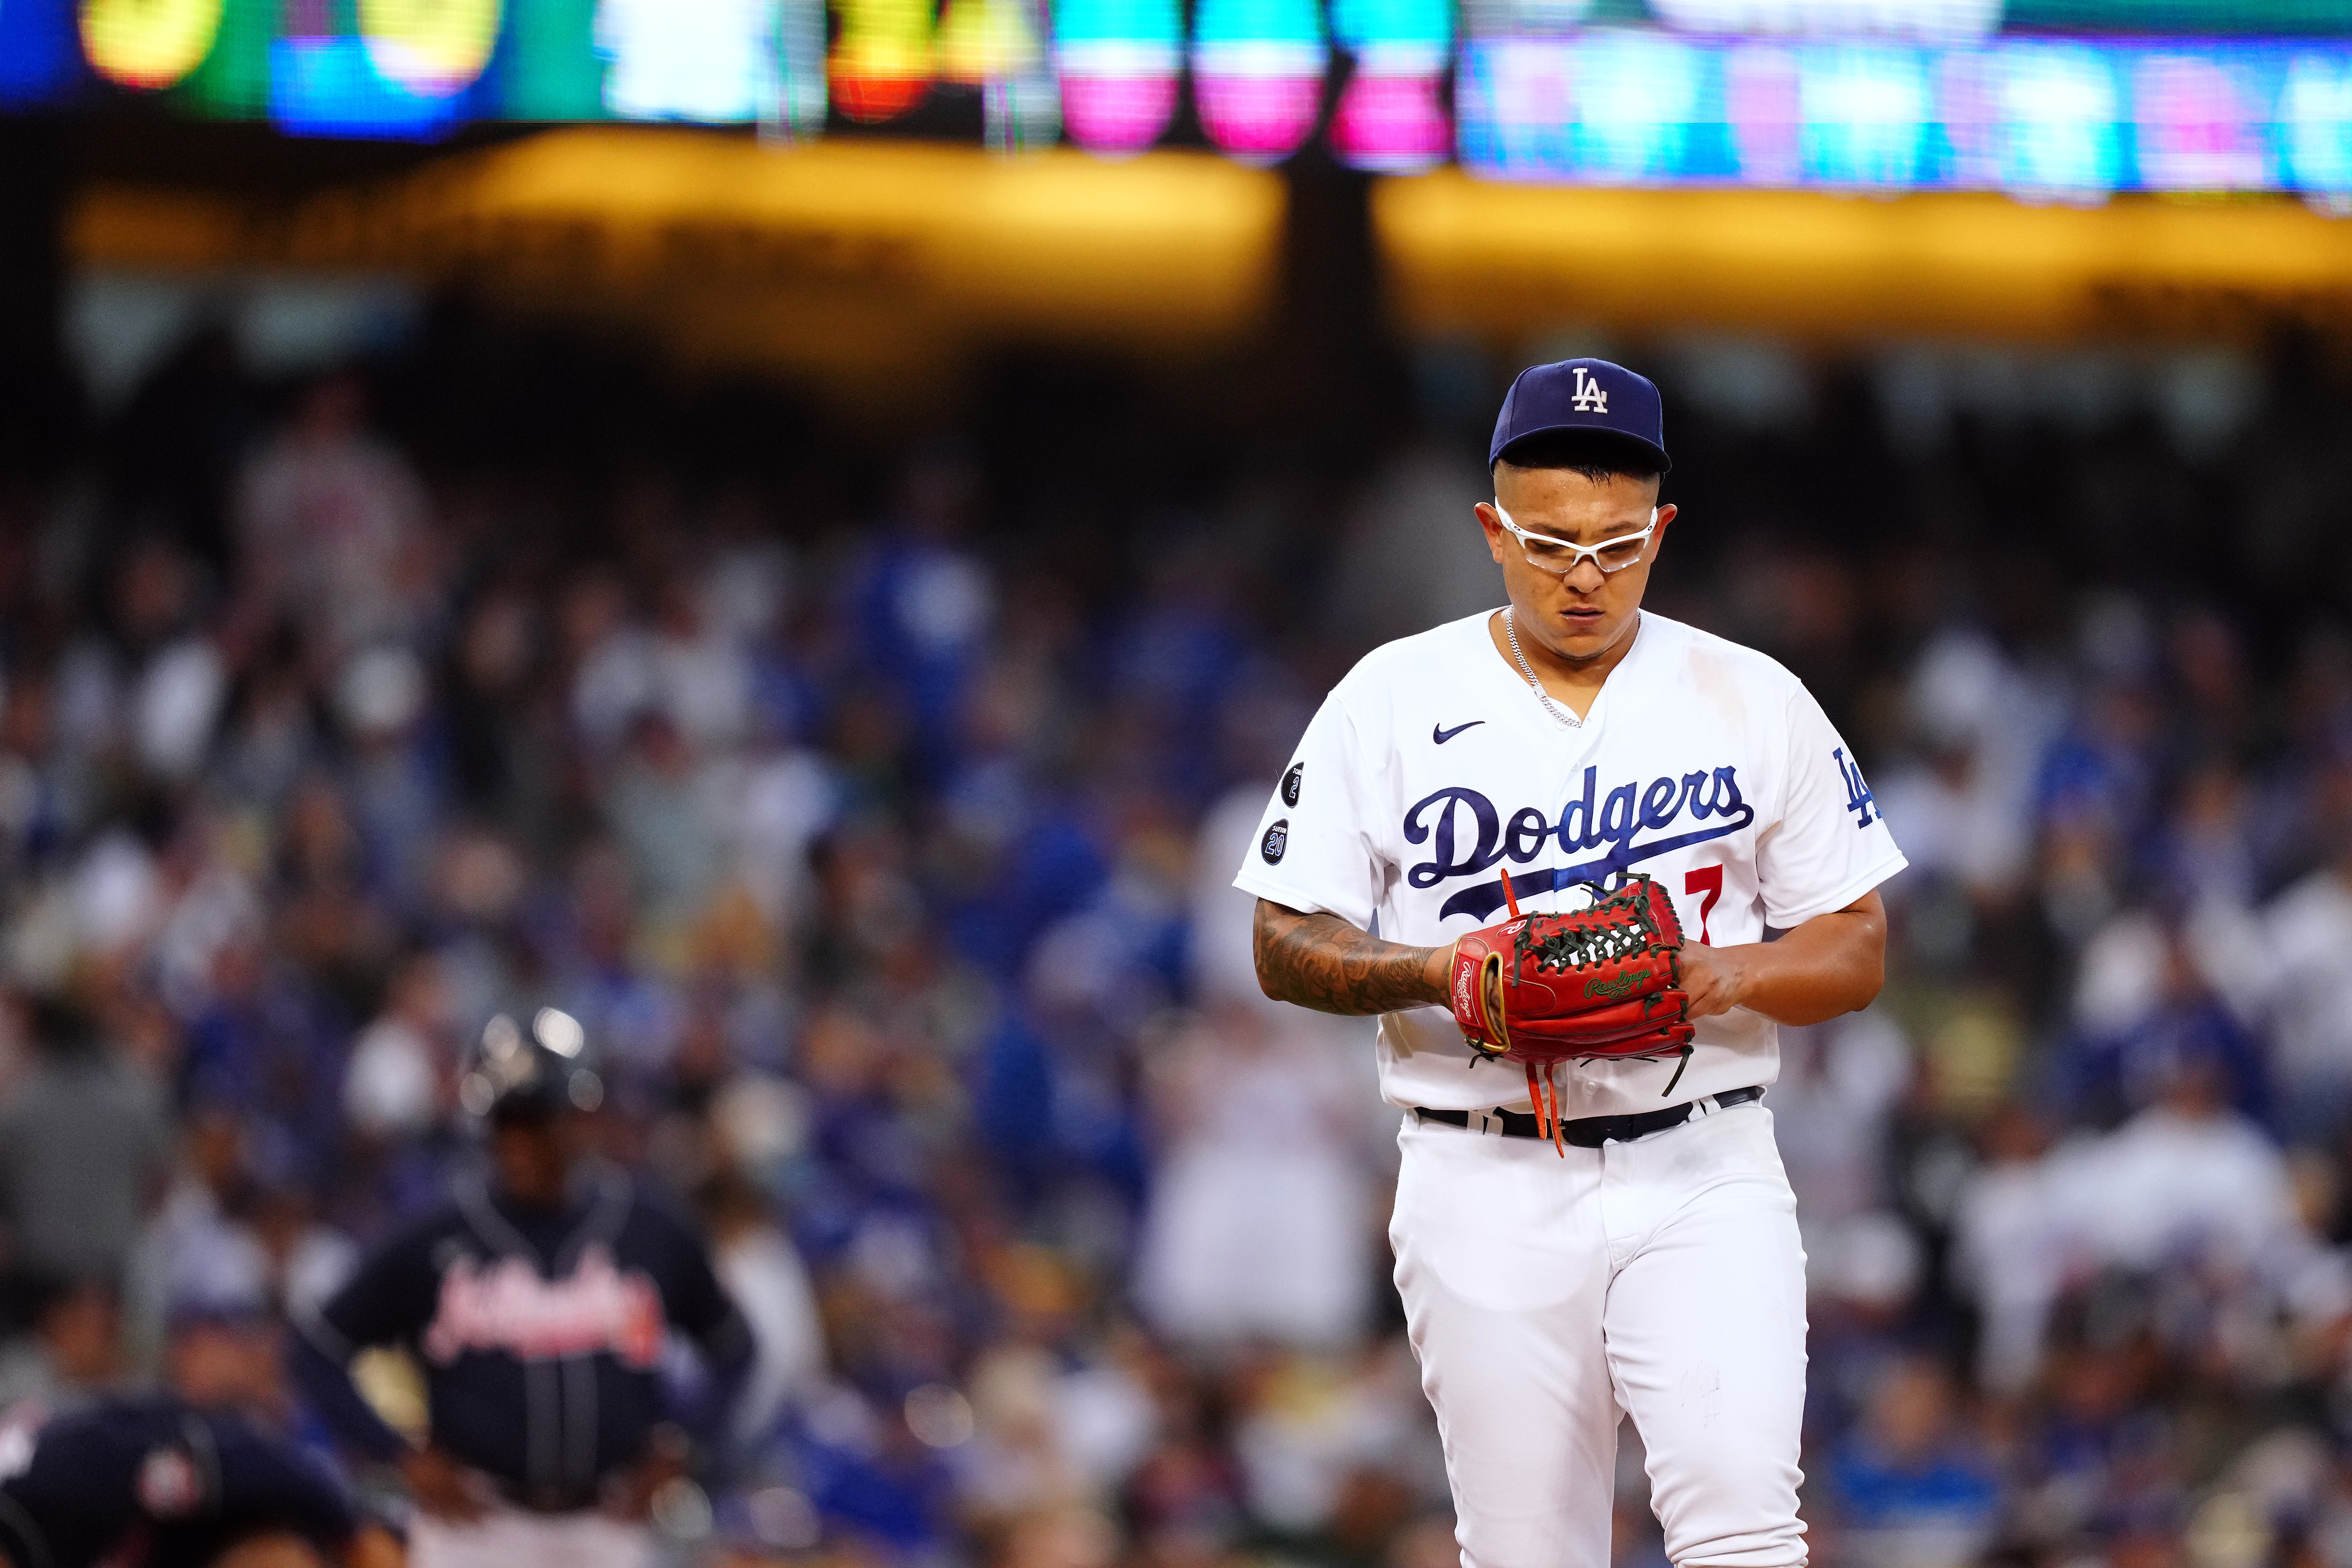 Dodger pitcher Julio Urias reacts as he meets Miles Urias, a young